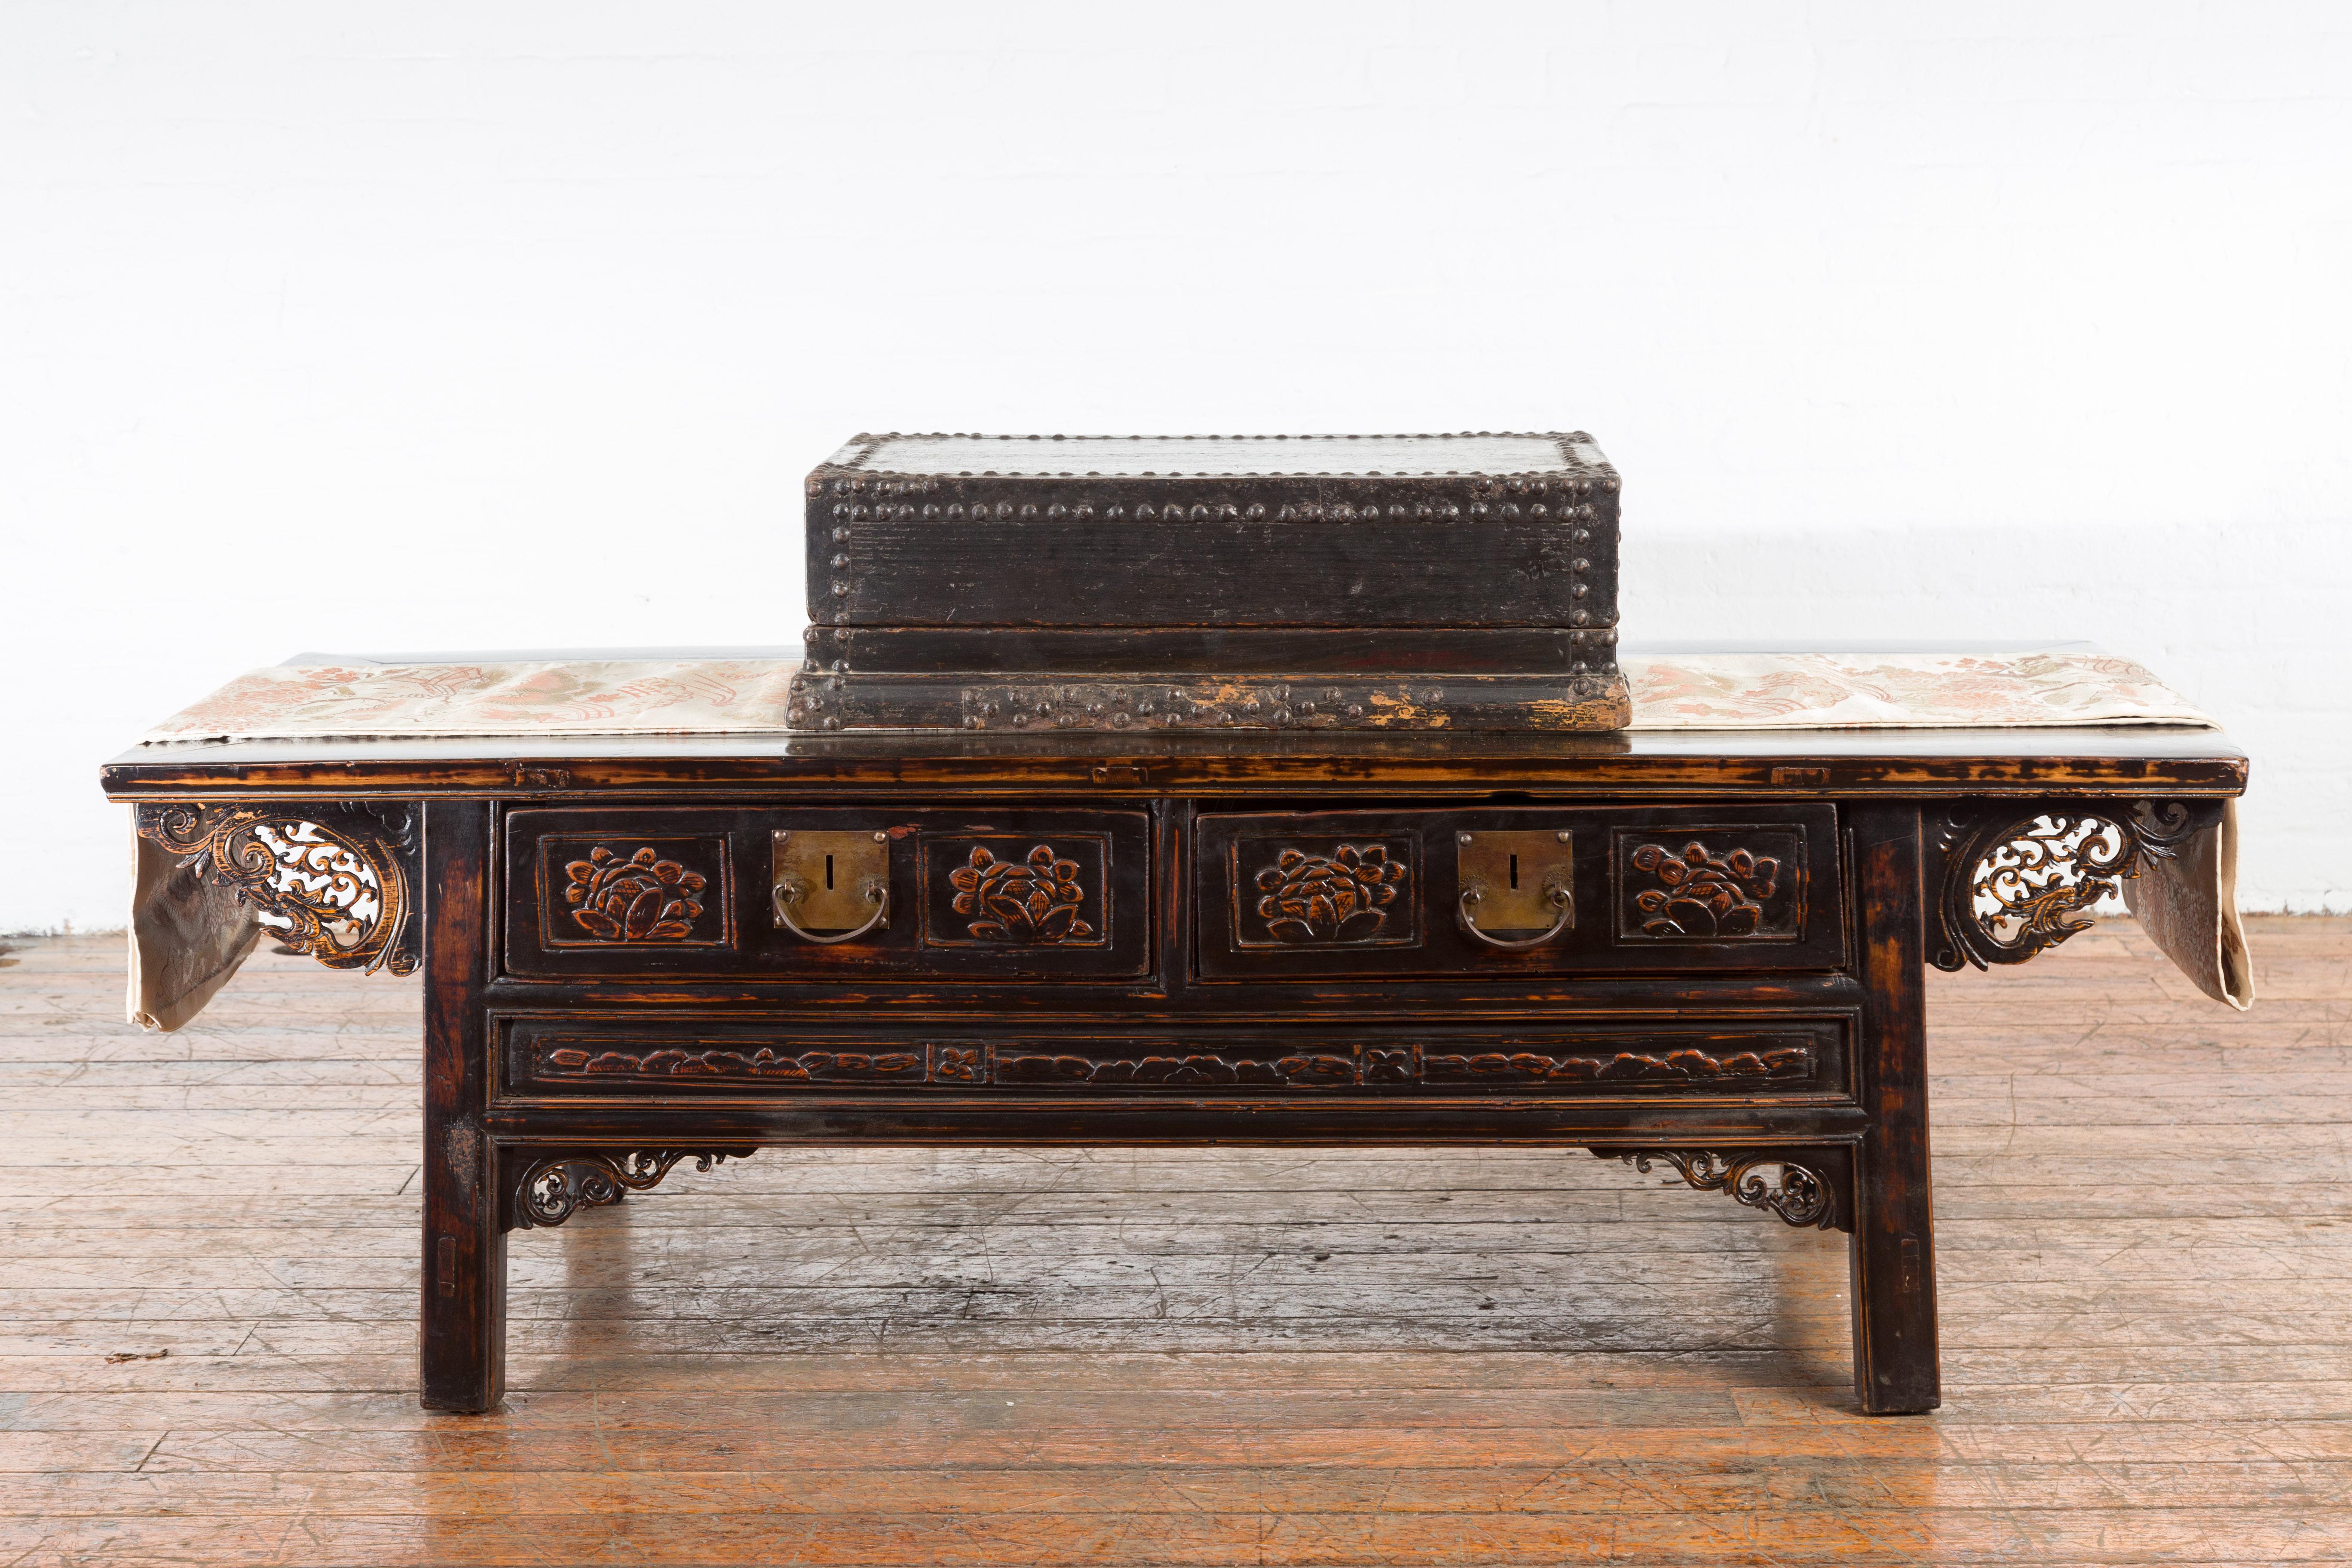 An Indian antique black box from the 19th century with iron nailheads and braces, carved wooden base and rustic patina. Created in India during the 19th century, this box features a linear silhouette perfectly complimented by a black patina accented